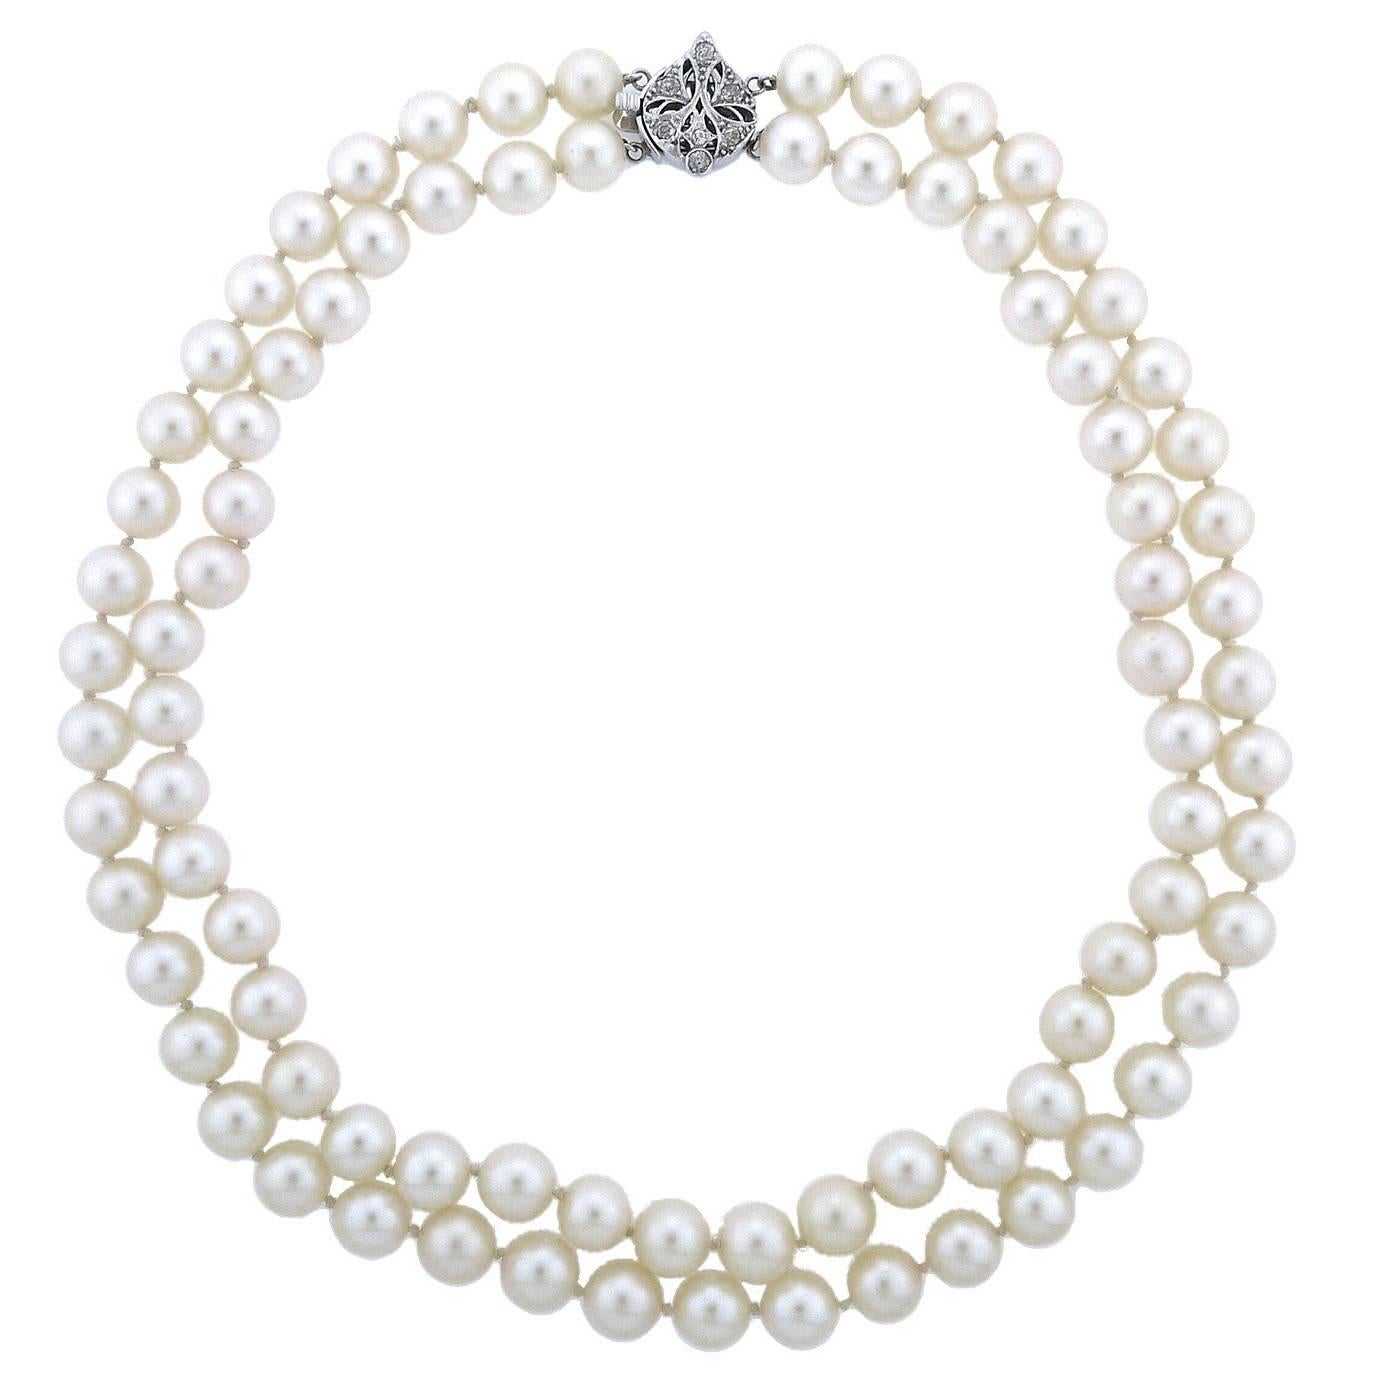 Double Strand Cultured Pearl Necklace with Gold Diamond Clasp